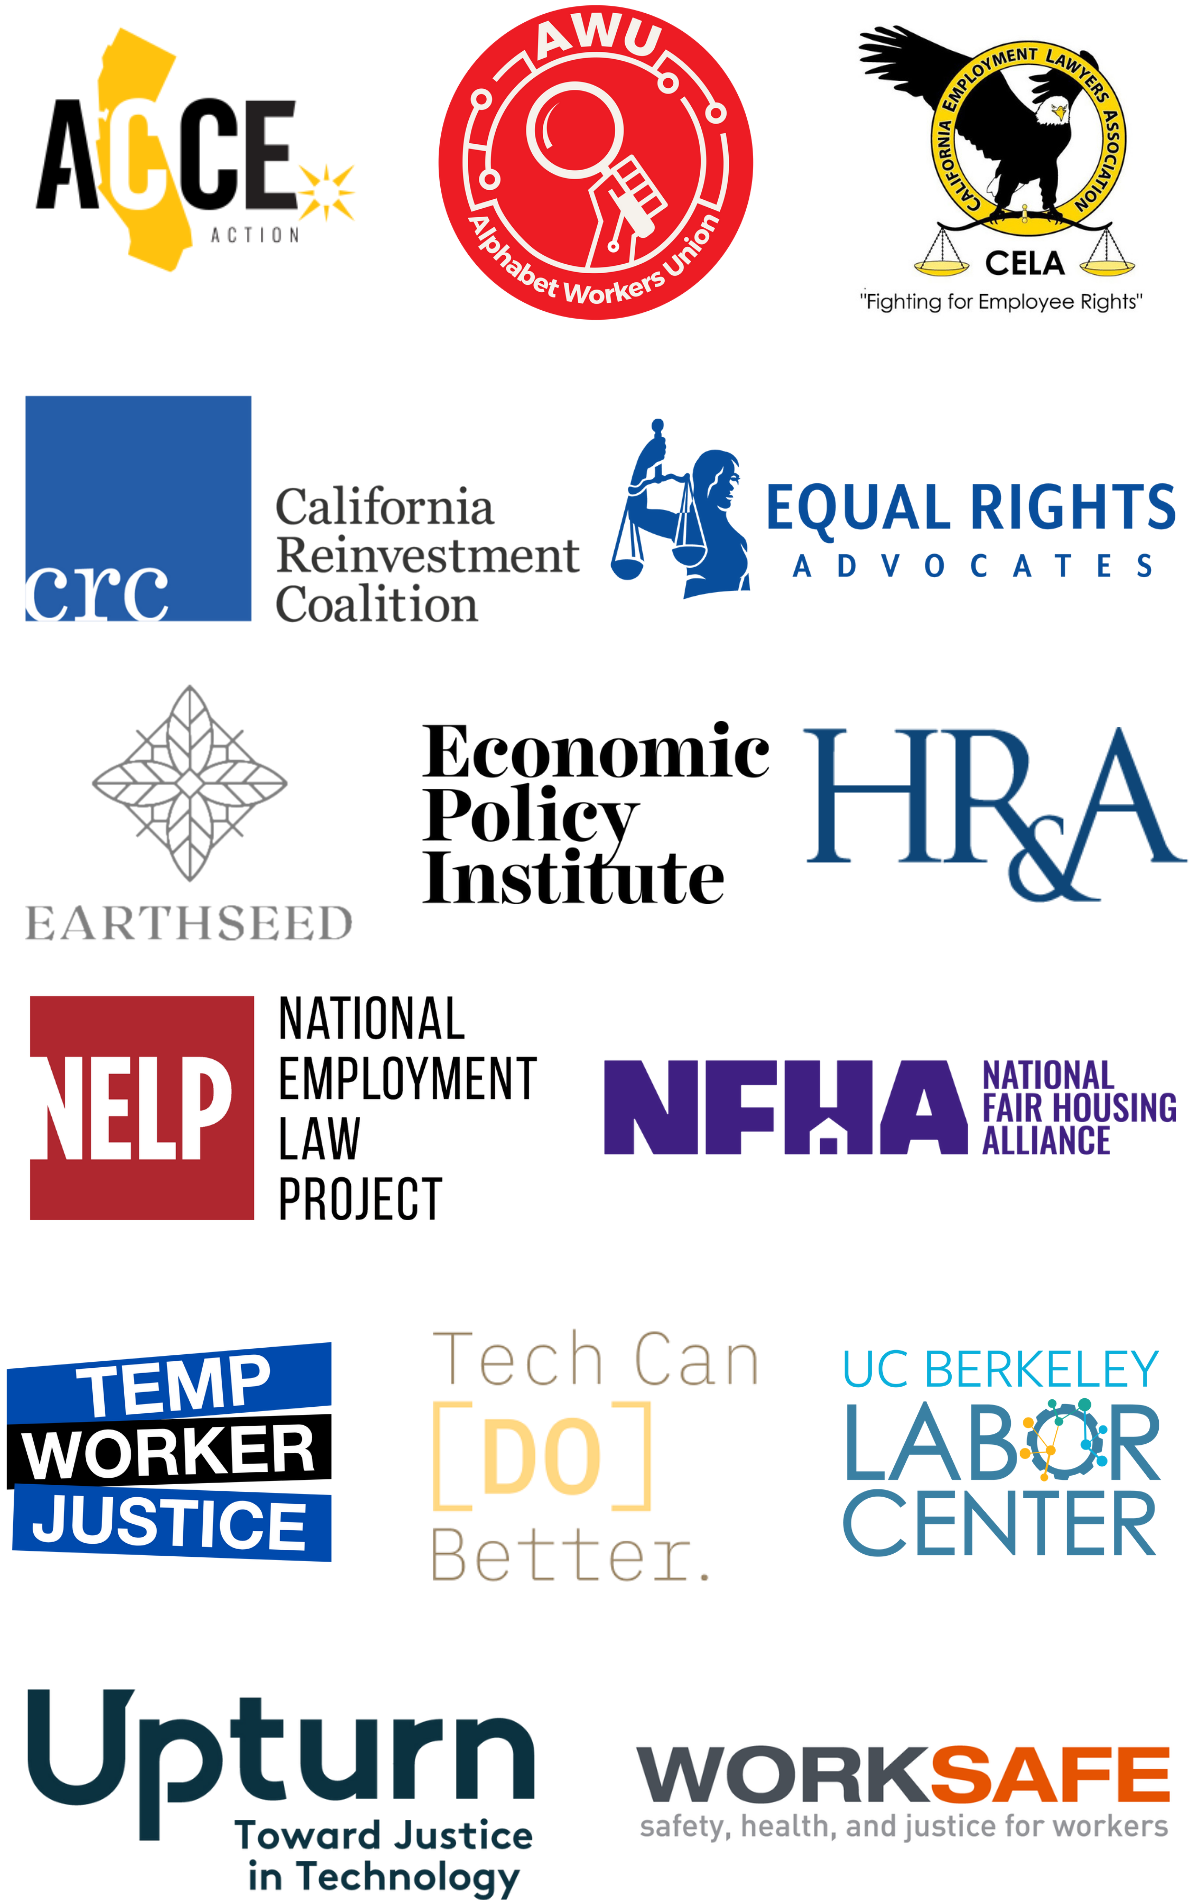 The logos of our advocacy partners: ACCE Action Alphabet Workers Union California Reinvestment Coalition California Employment Lawyers Association Earthseed Economic Policy Institute Equal Rights Advocates HR&A Advisors National Employment Law Project National Fair Housing Alliance Temp Worker JUstice Tech Can Do Better UCB Labor Center Upturn Worksafe